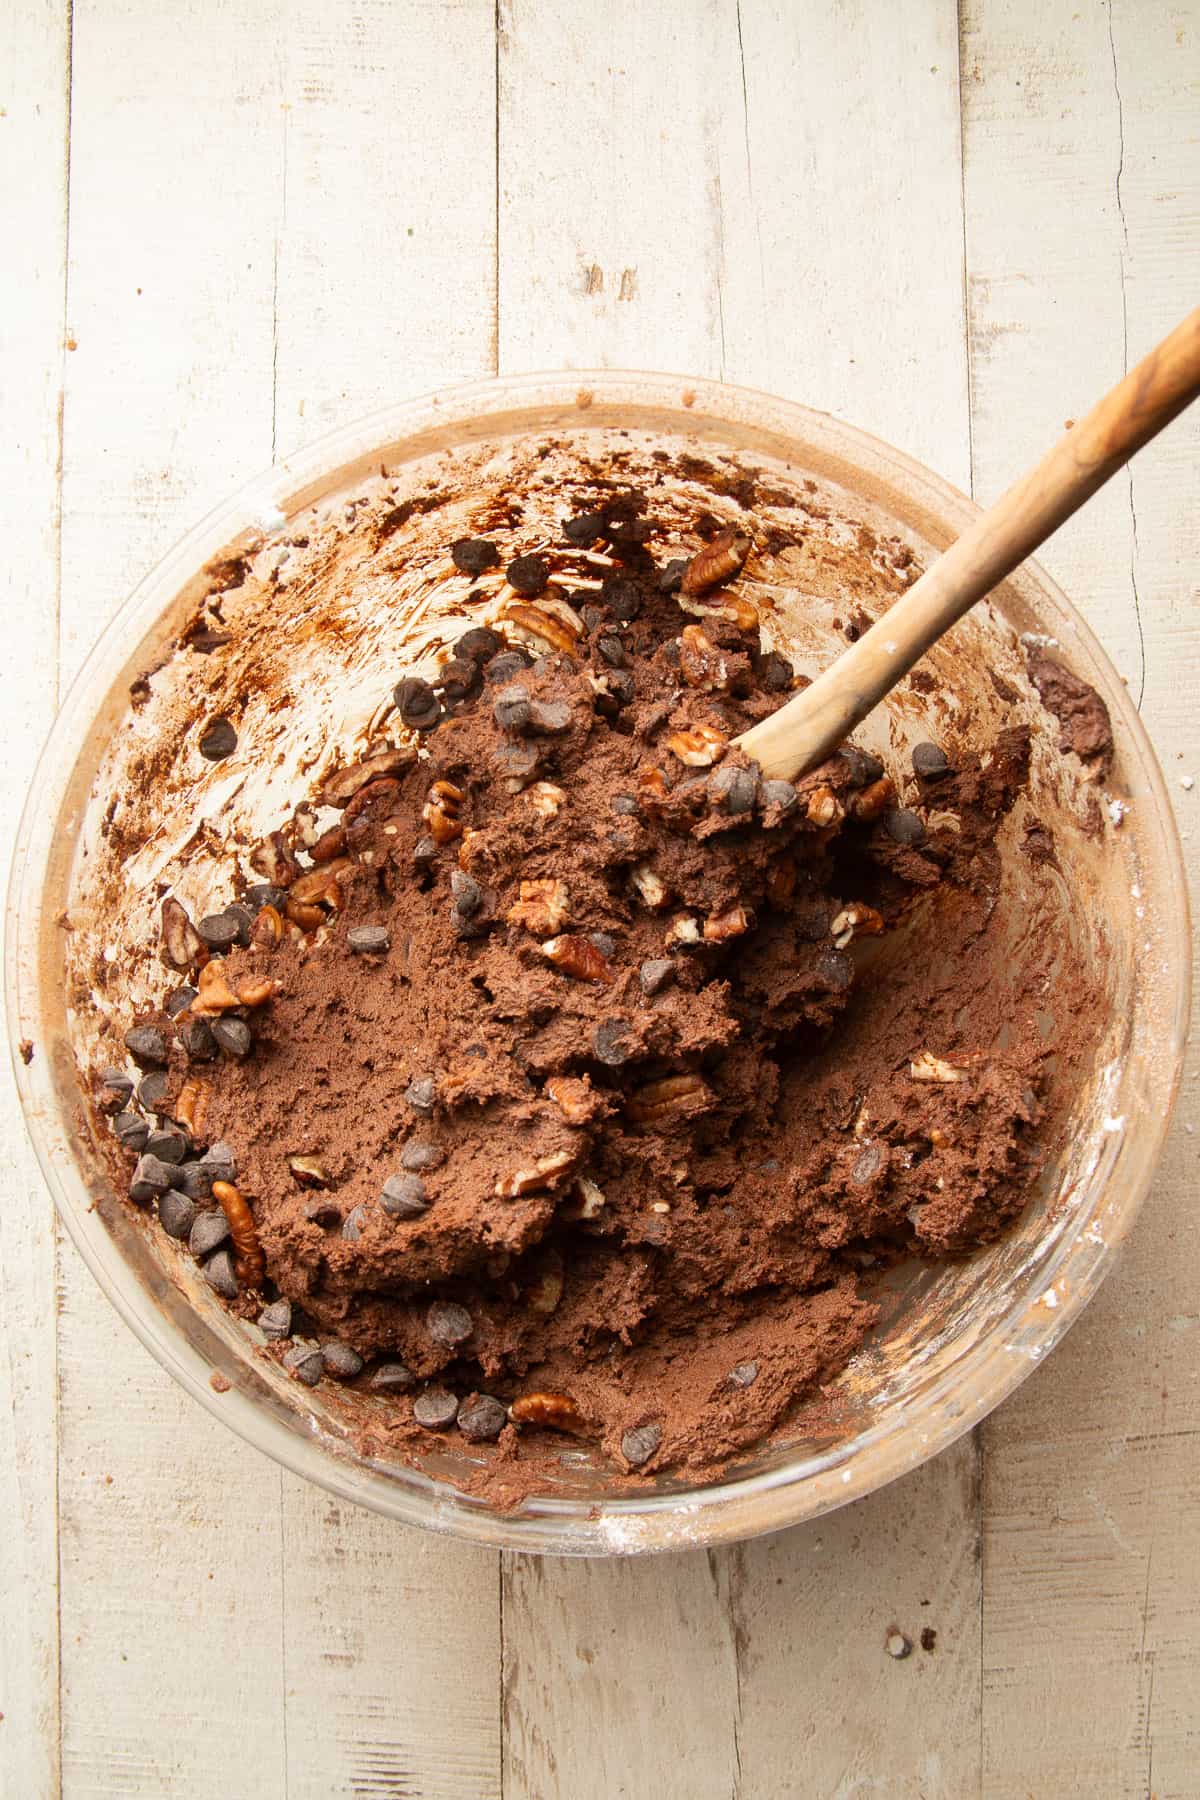 Chocolate cookie dough in bowl with chocolate chips and pecans, with a wooden spoon.